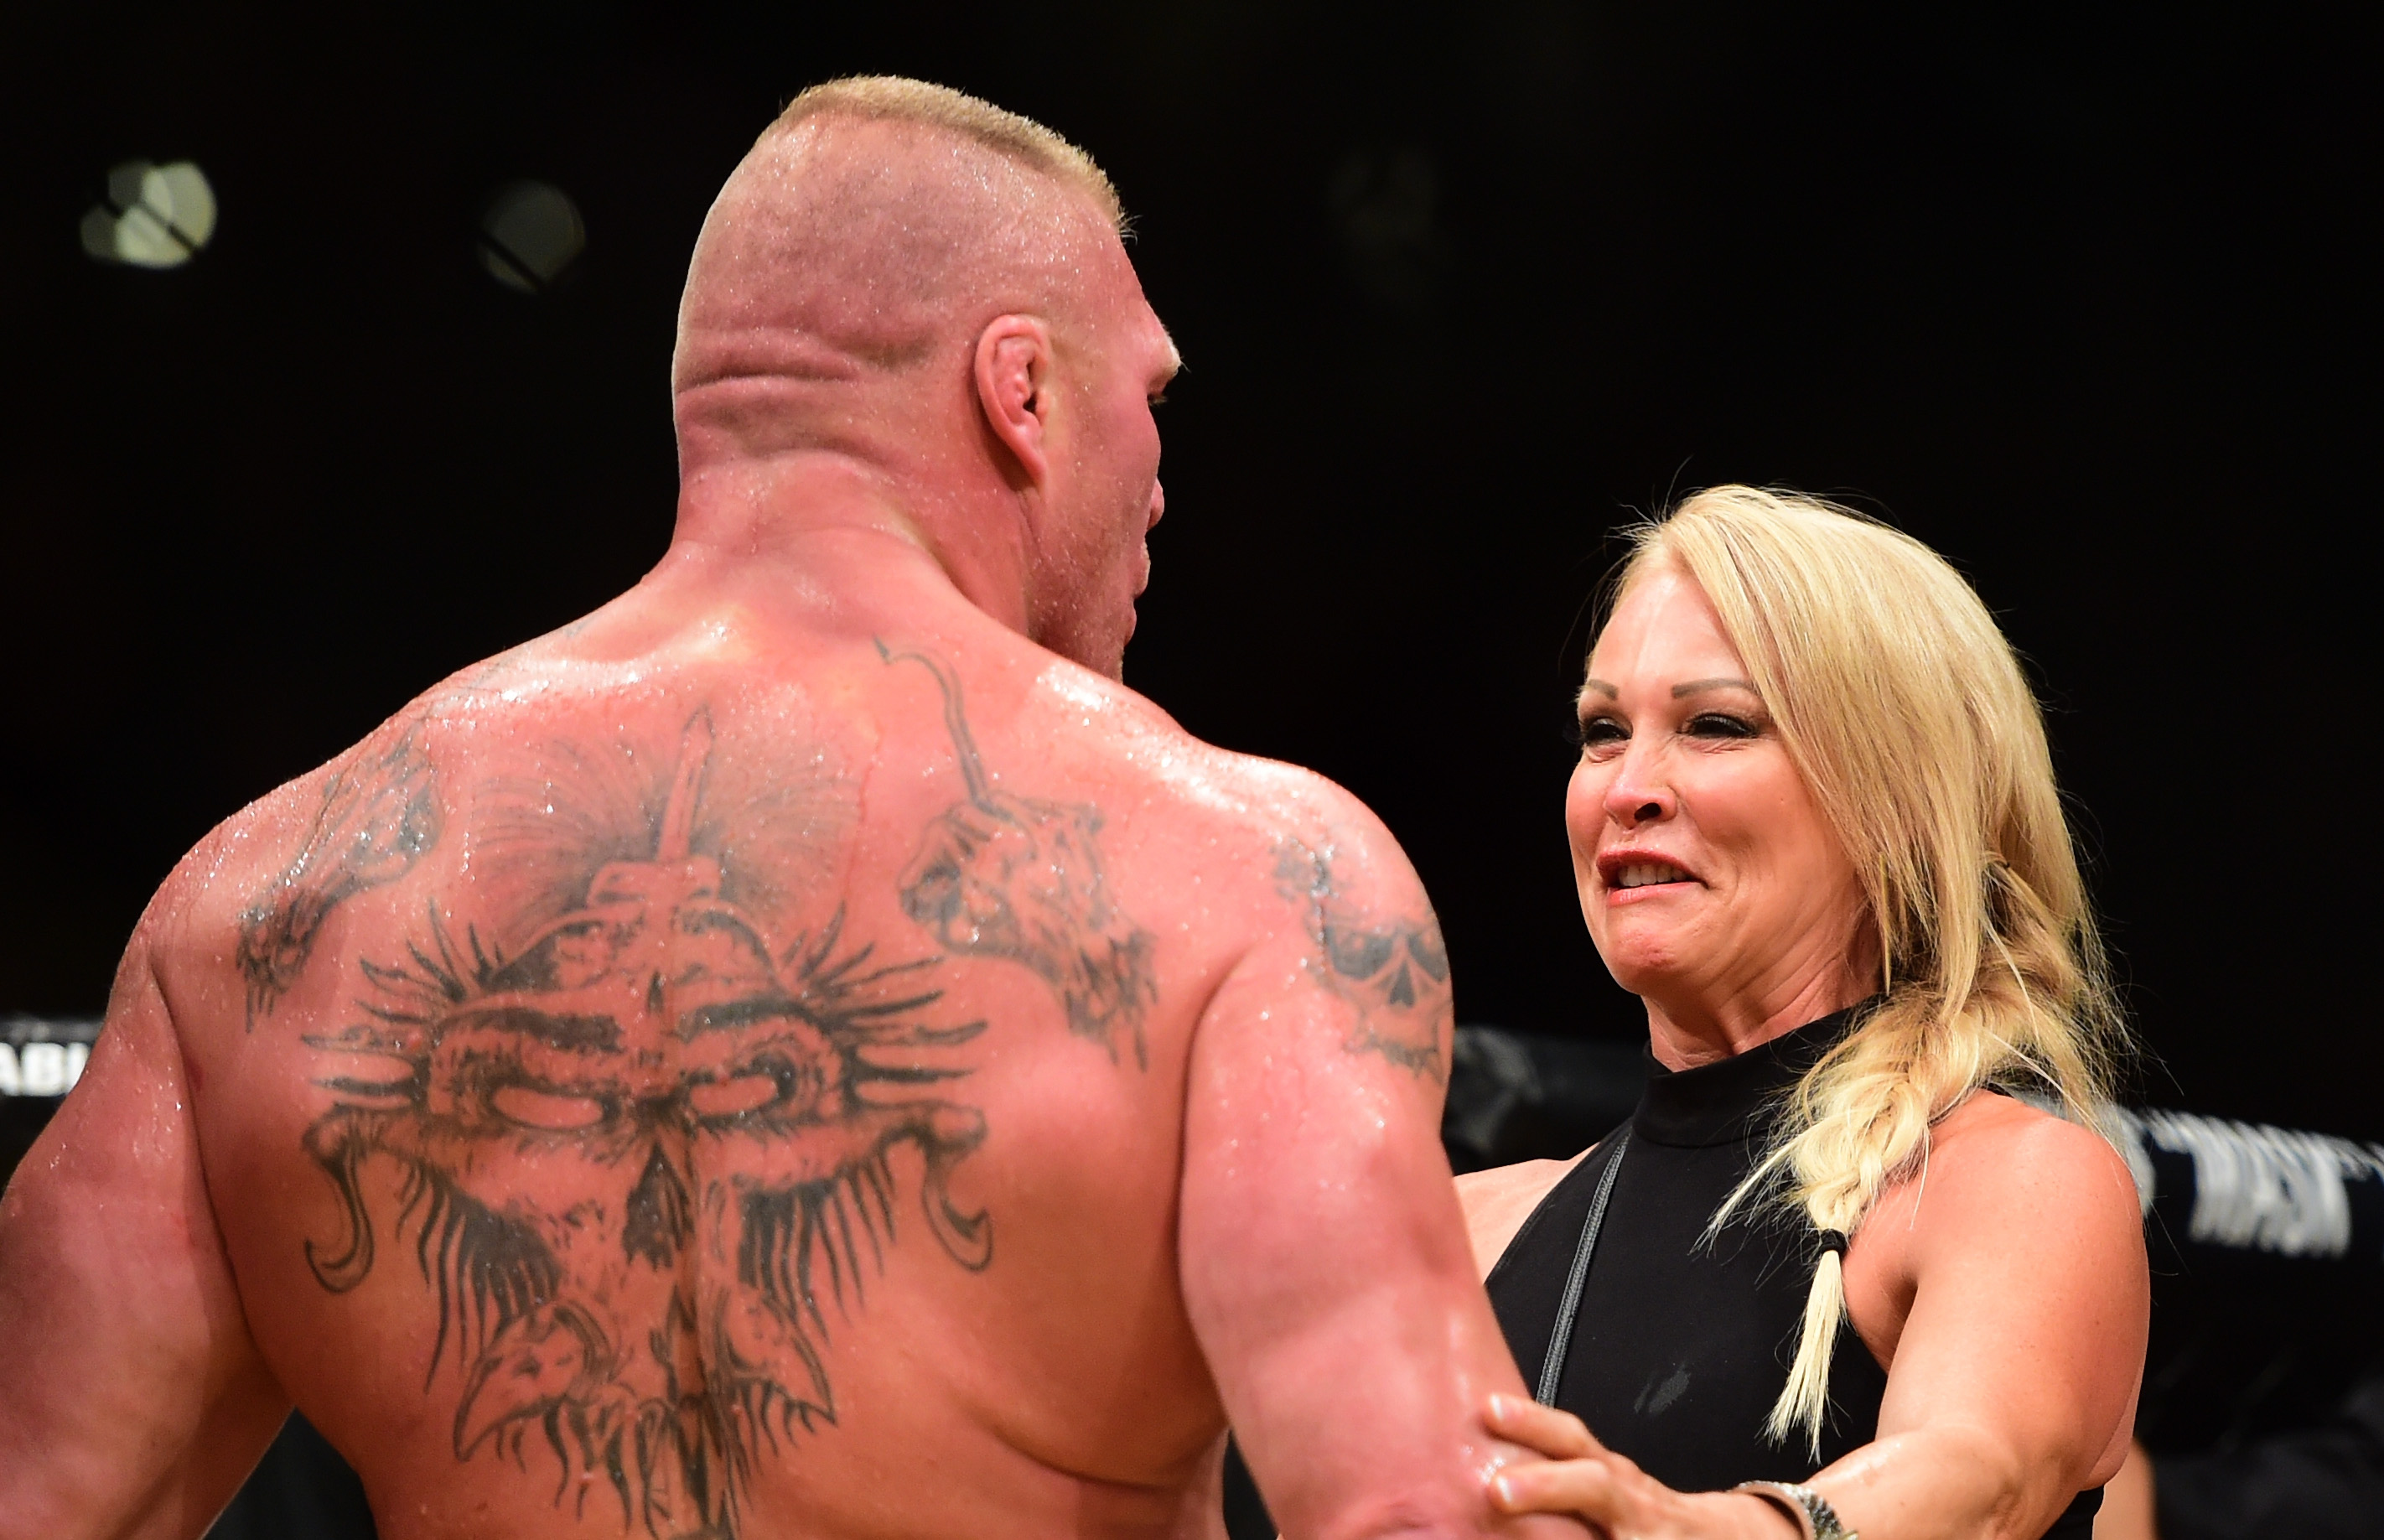 Brock Lesnar and his wife Rena Lesnar on July 9, 2016 at T-Mobile Arena in Las Vegas, Nevada. | Source: Getty Images